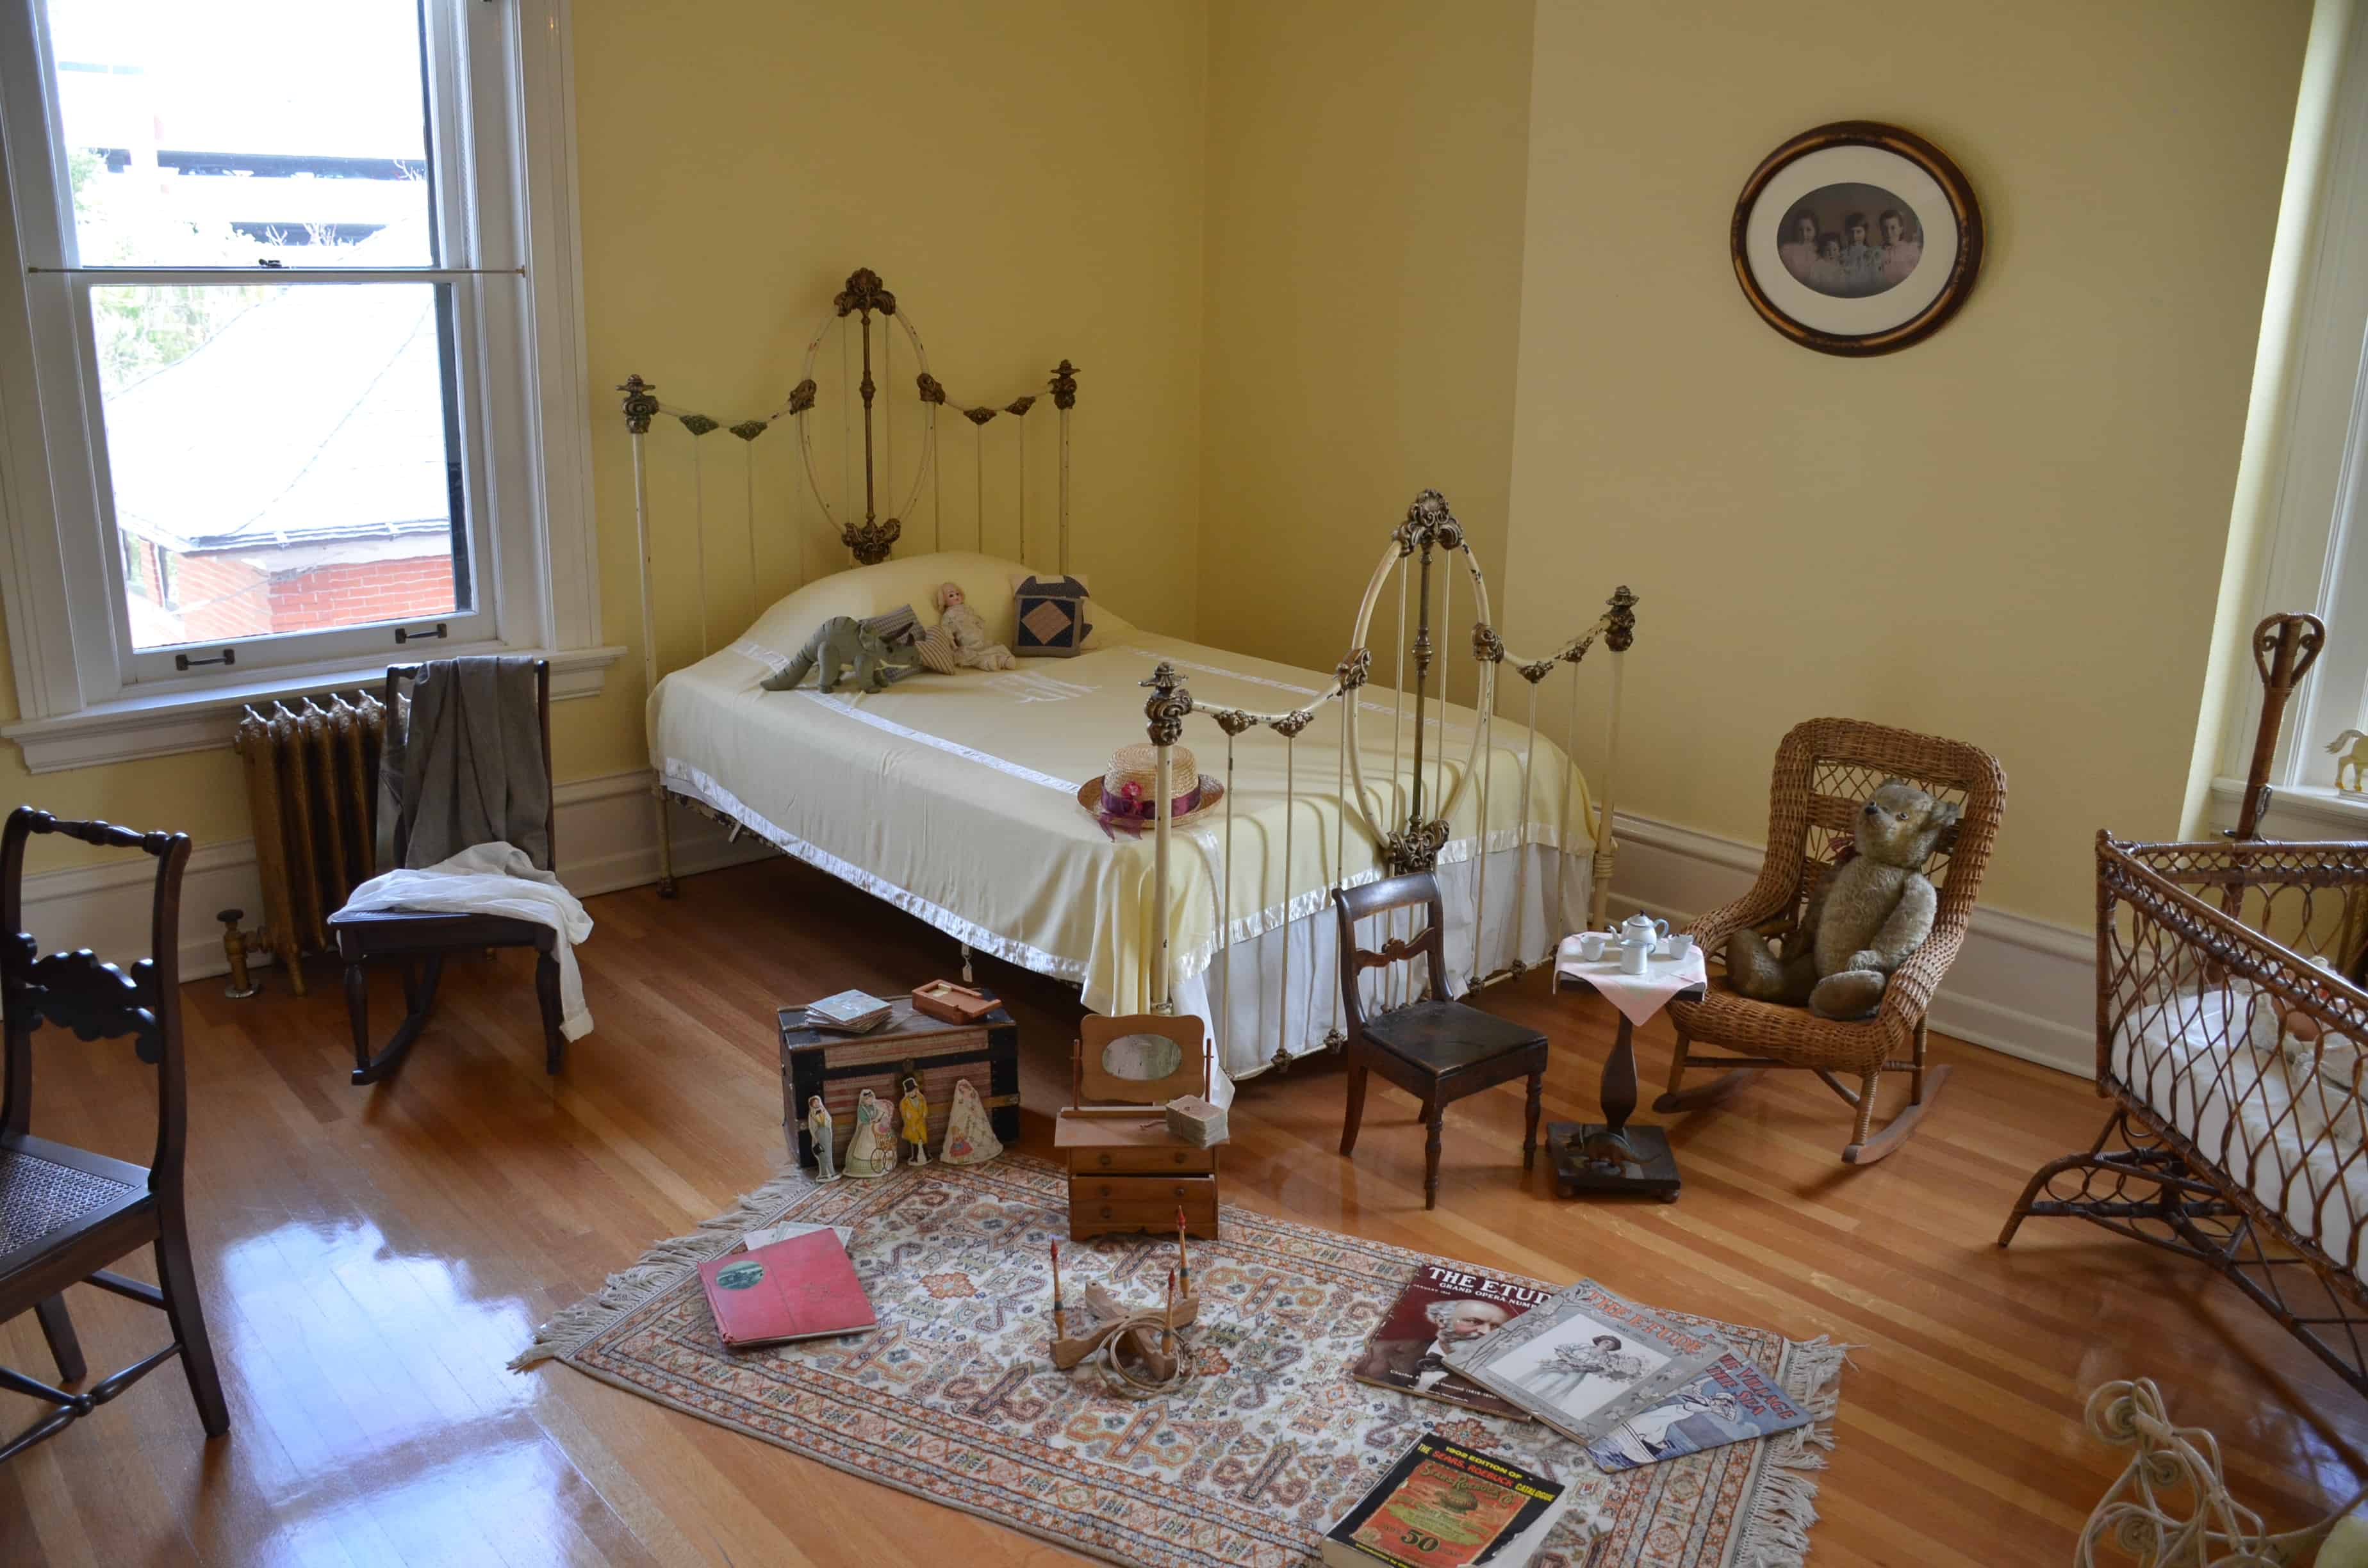 Children's room in the Wyoming Governor's Mansion in Cheyenne